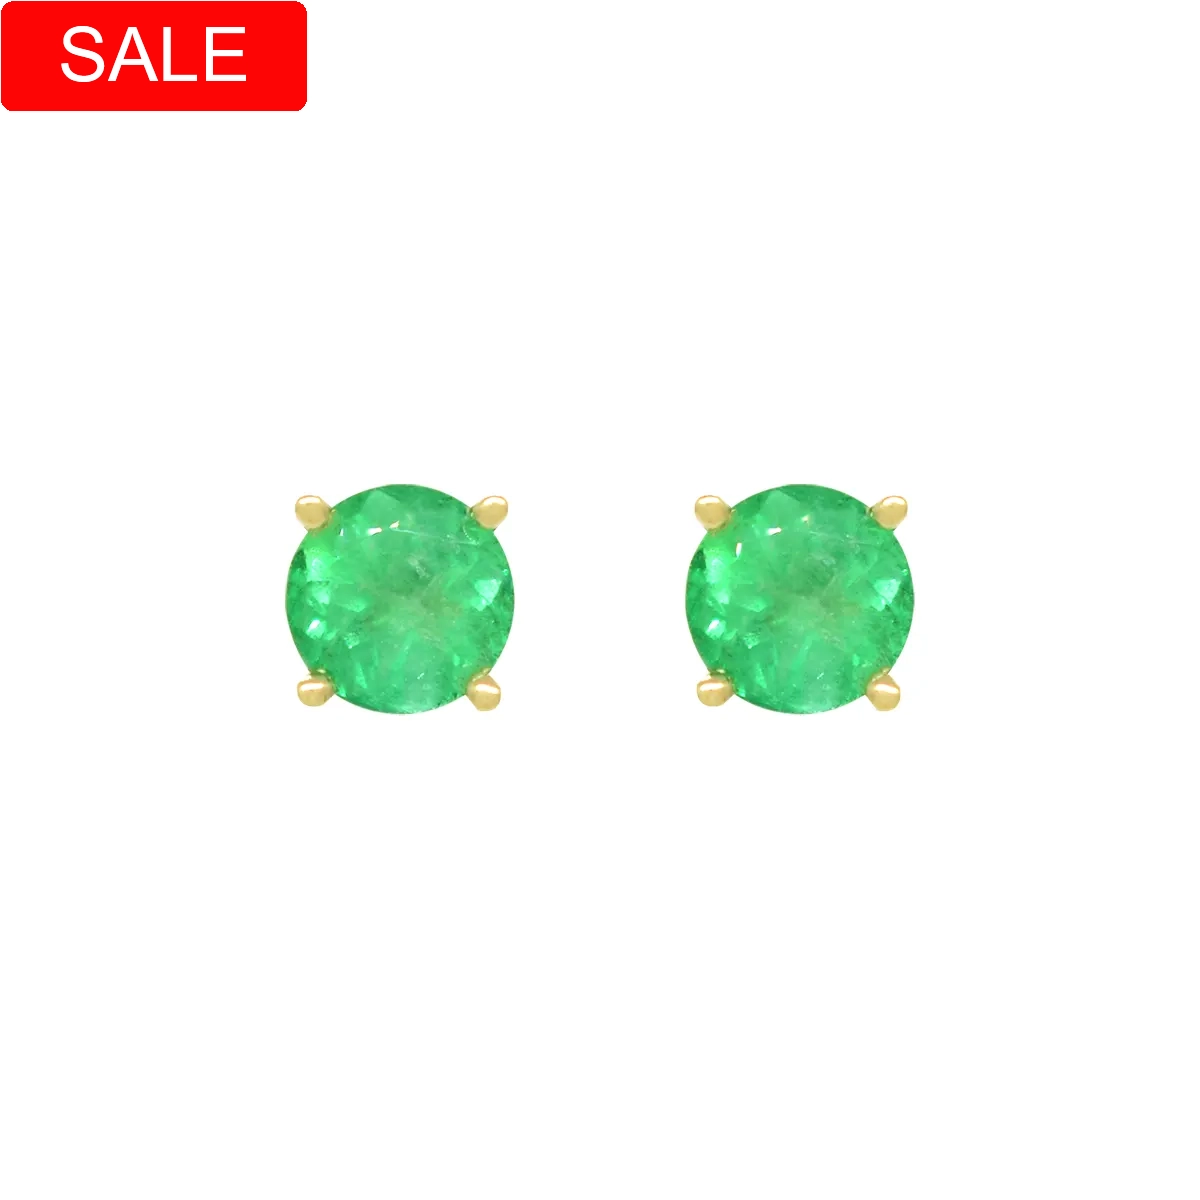 18K gold circular emerald stud earrings with 0.88 Ct. t.w. in 2 round cut natural Colombian emeralds in a classic 4 prong setting